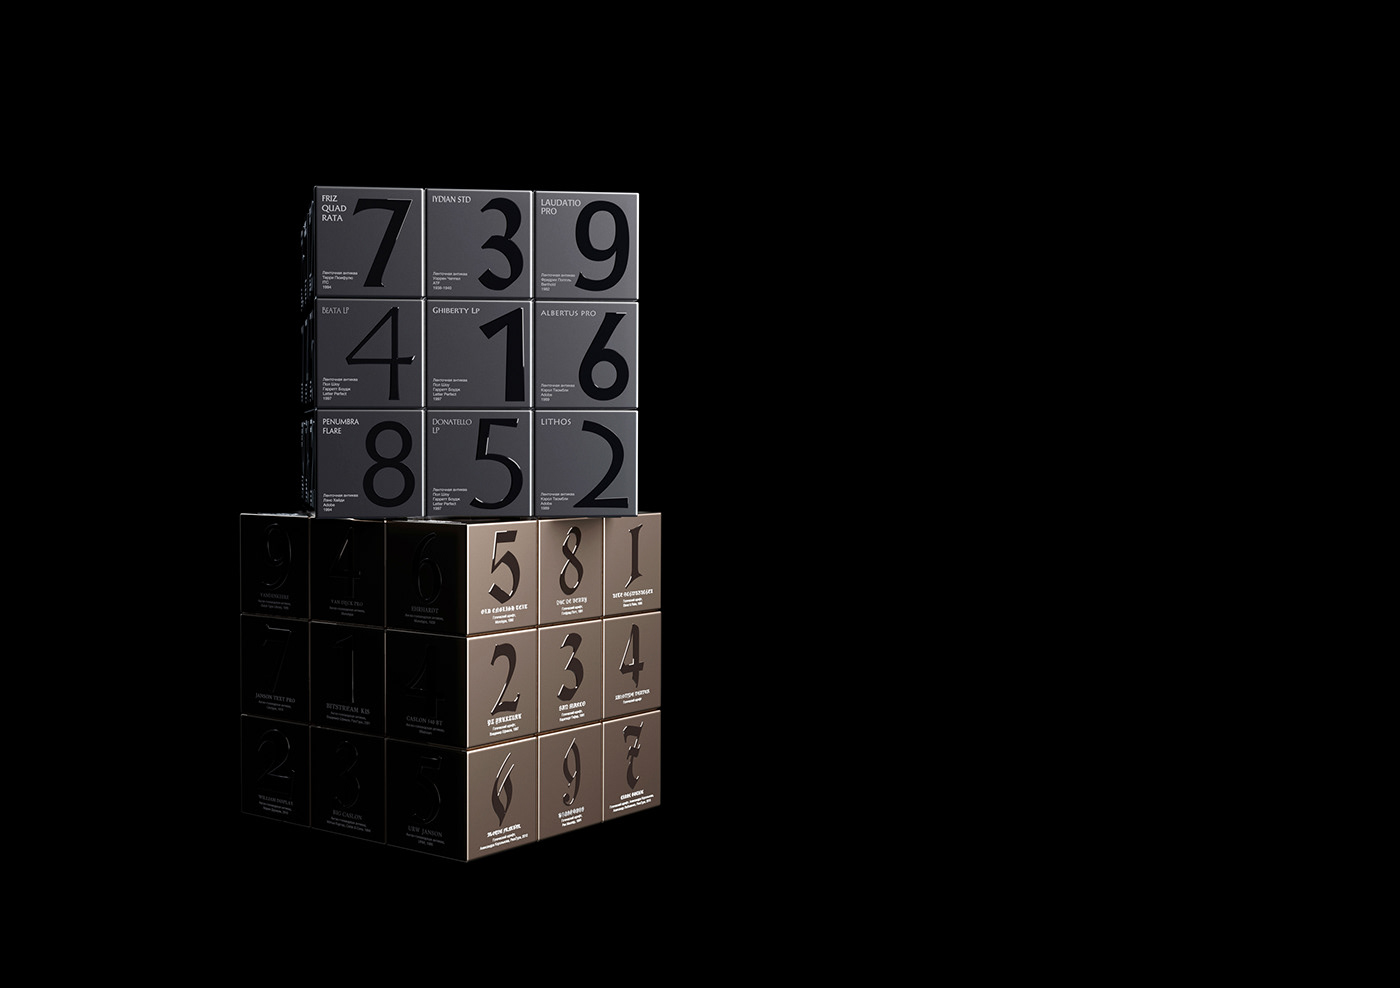 3D Exhibition  font rubik's cube Typeface typography   visualization